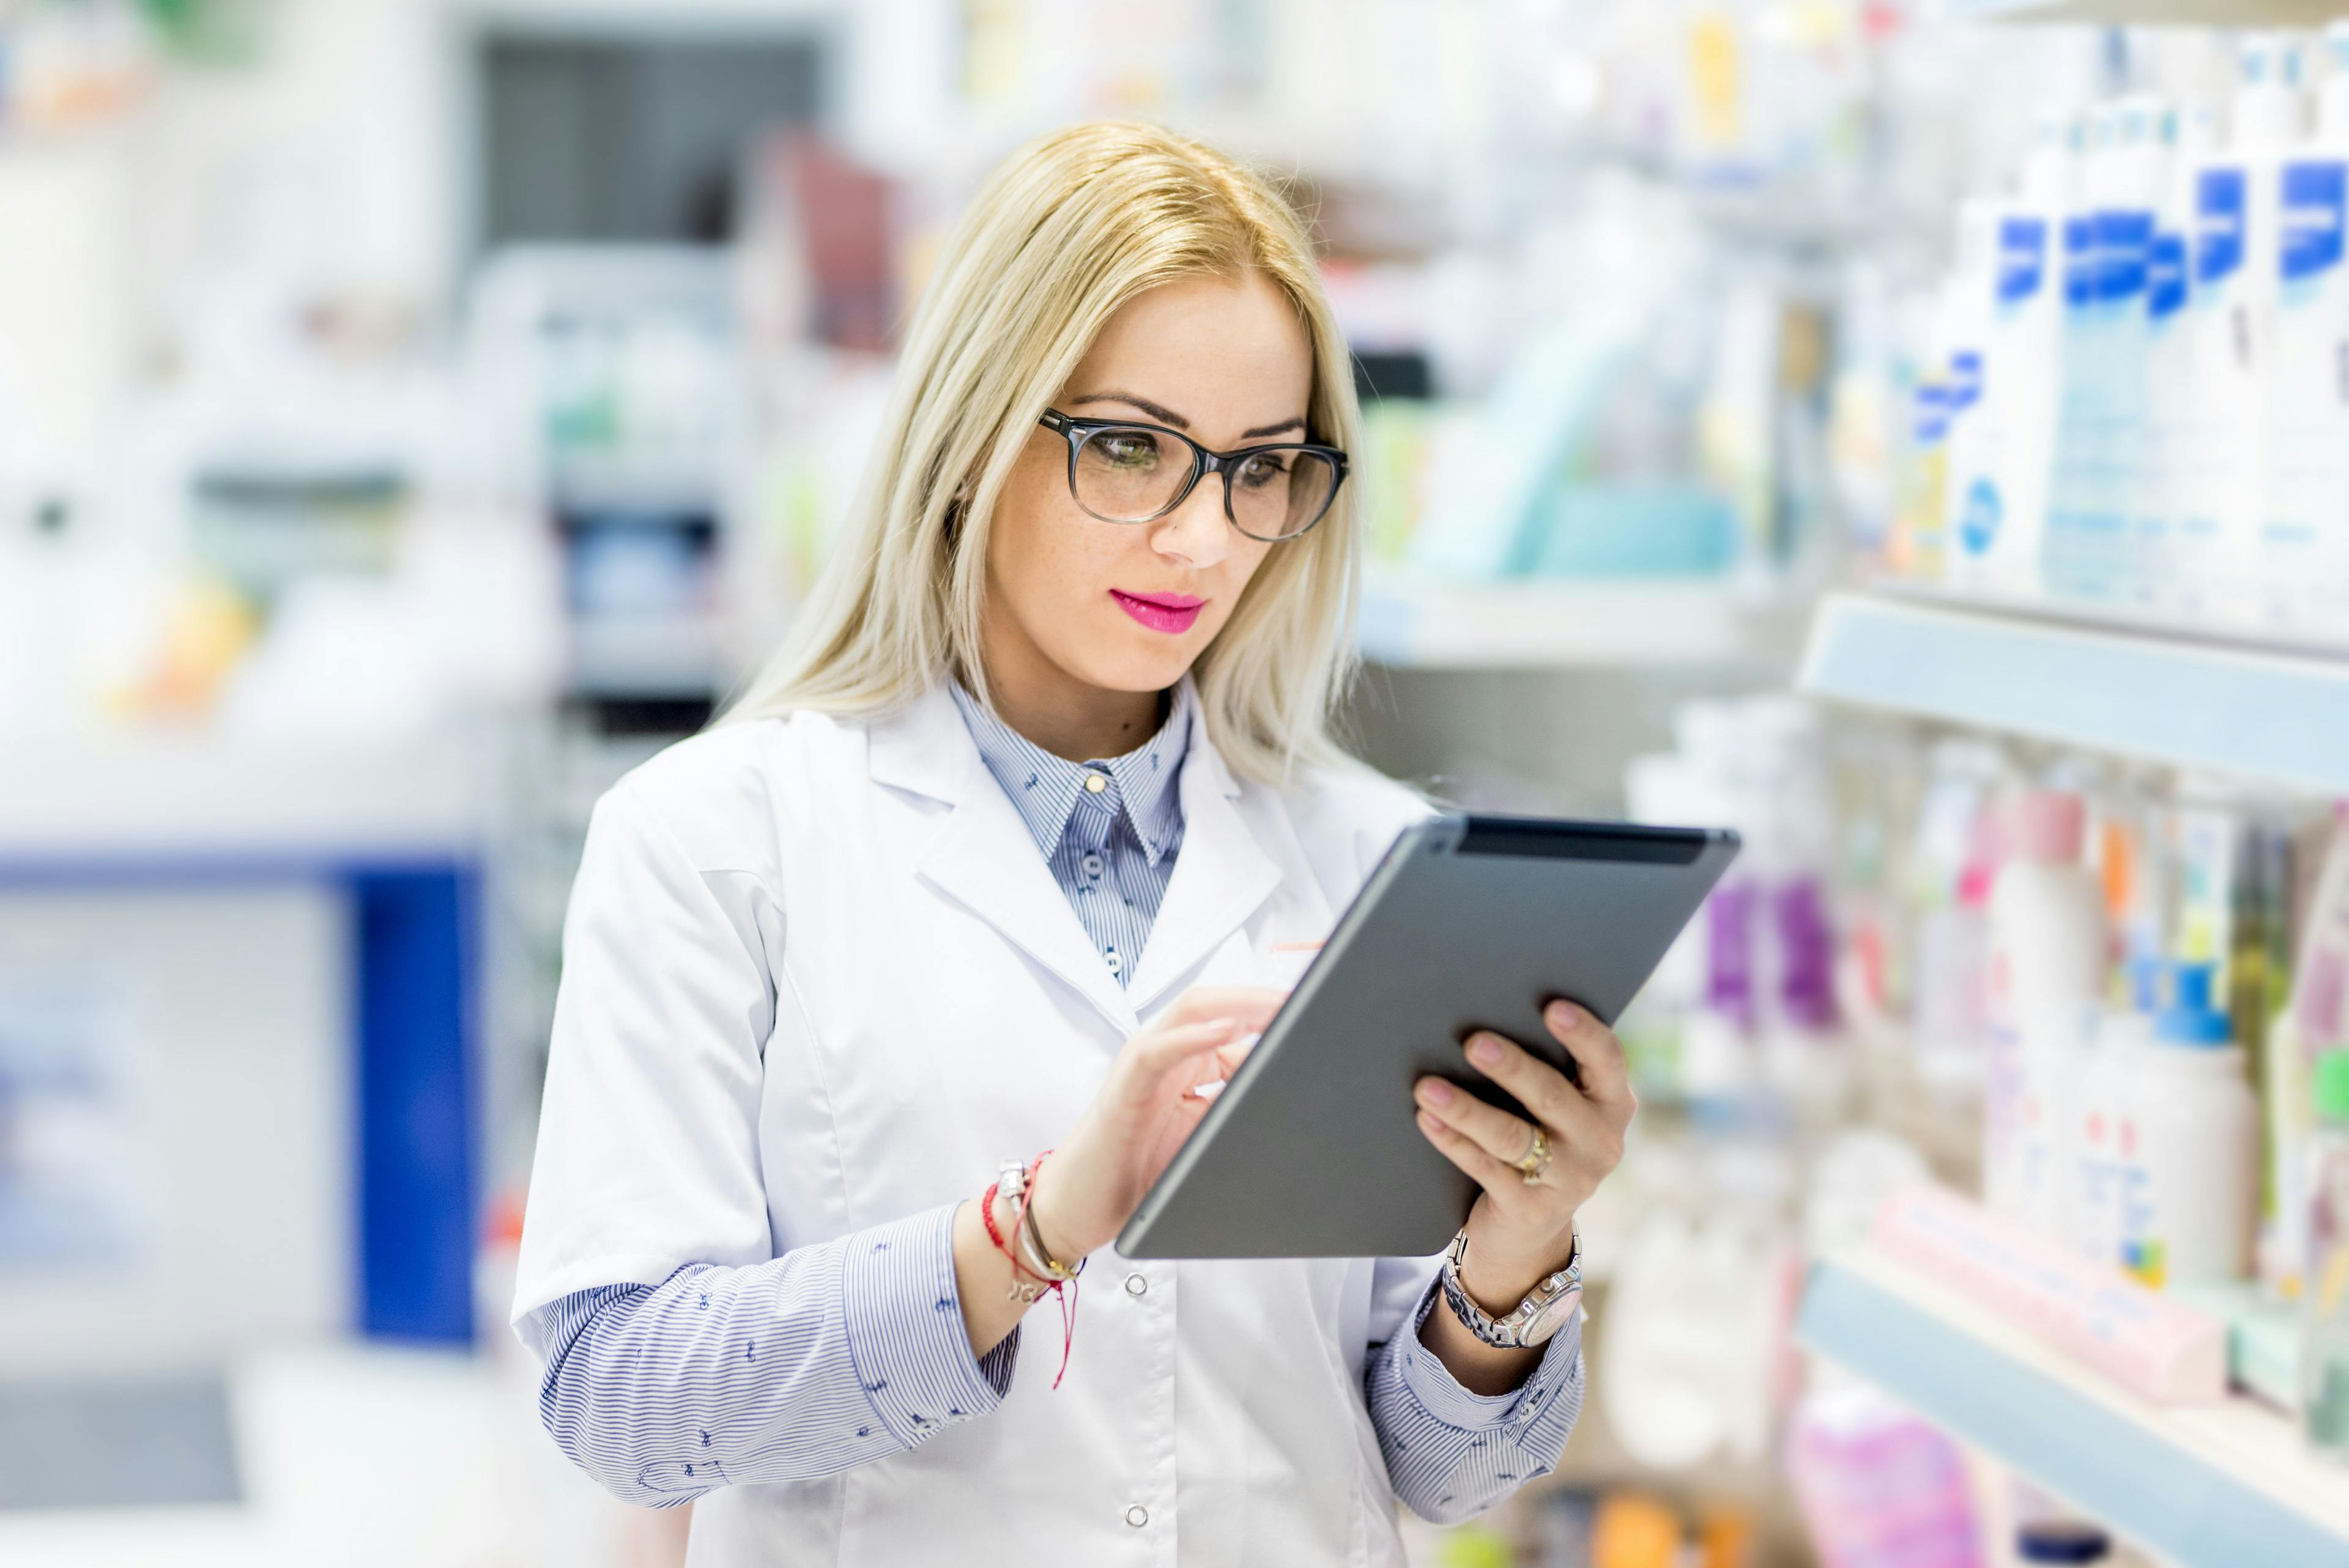 Addressing the Rising Rate of Hospital Pharmacist Burnout Through Automation, Technology-Enabled Services